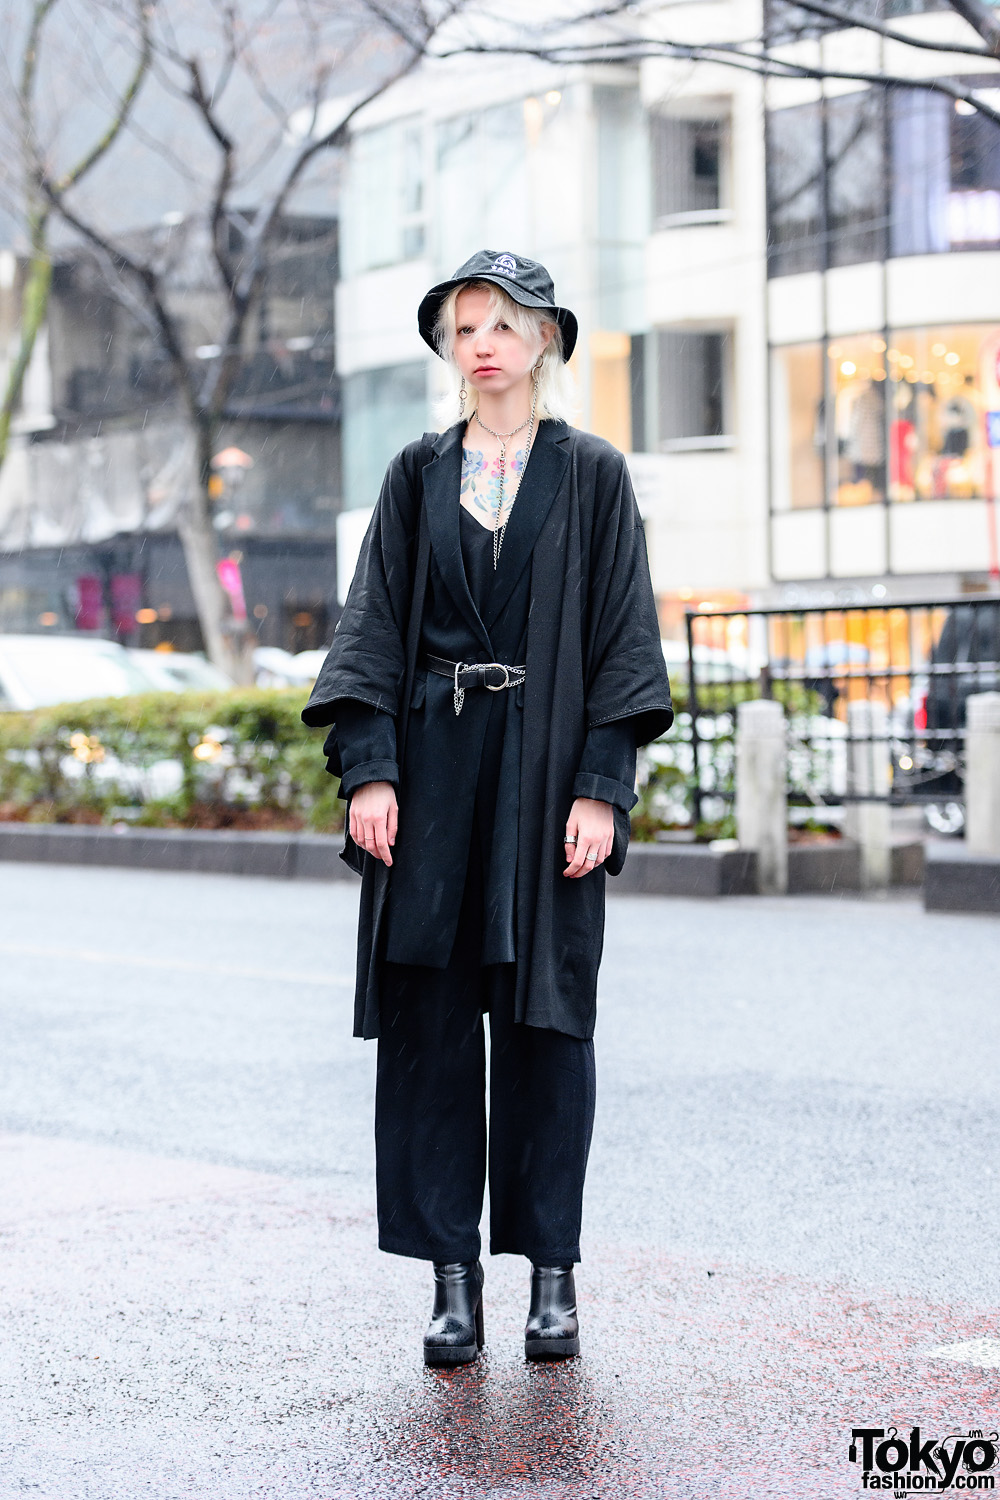 Russian Fashion Model's Chic All Black Tokyo Style w/ Chest Tattoos, Bucket Hat, Silver Chain Accessories, Kimono Coat, V-Neck Top, Pink Panther, Statement Tote Bag & Heeled Boots